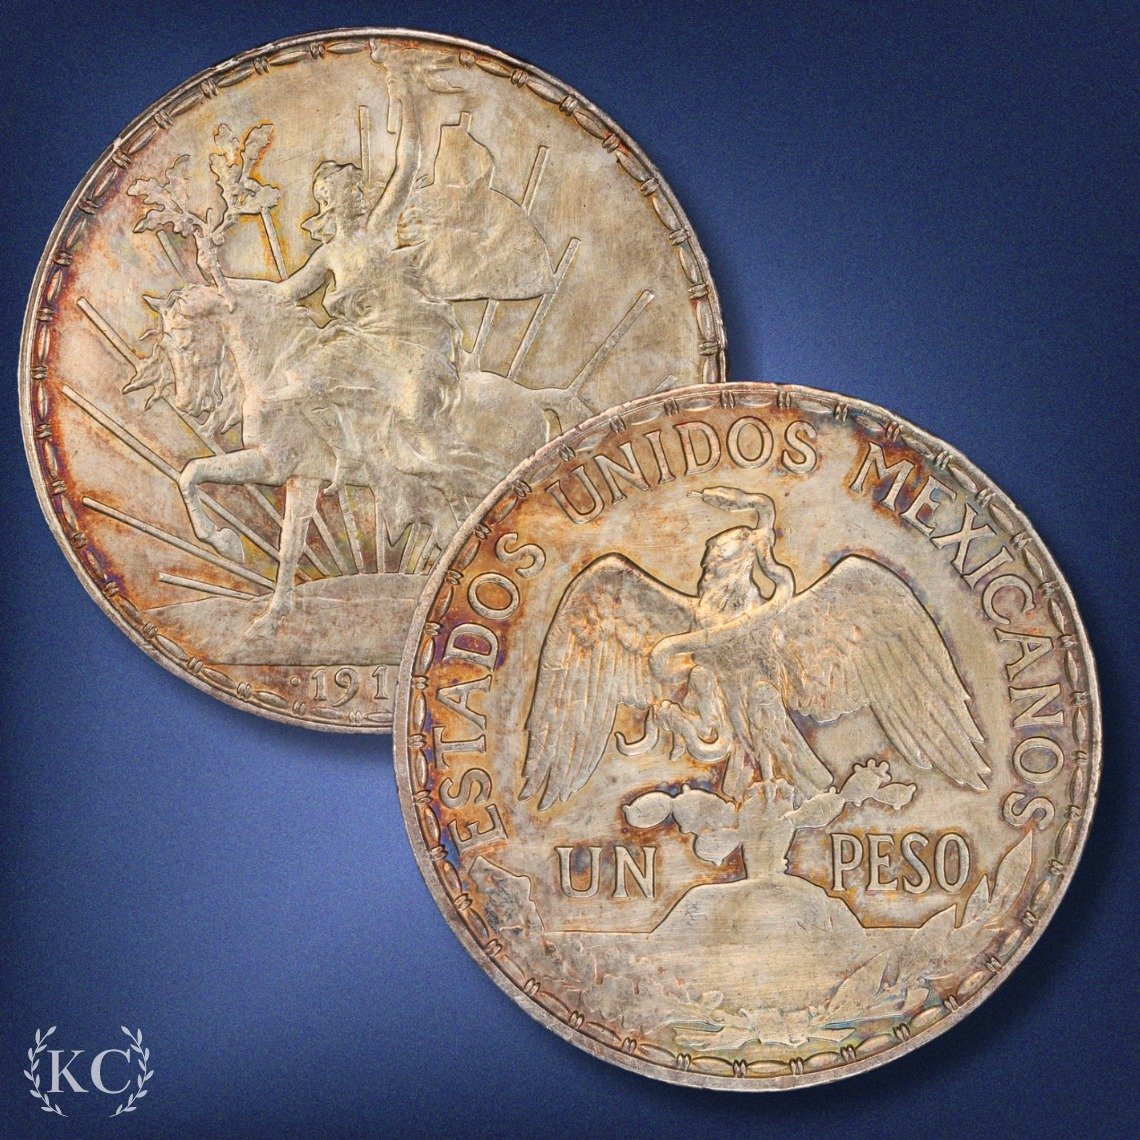 Take a look at this beautifully toned Mexican Cry For Independence coin! Get it today!

#Mexico #TonerTuesday #Silver